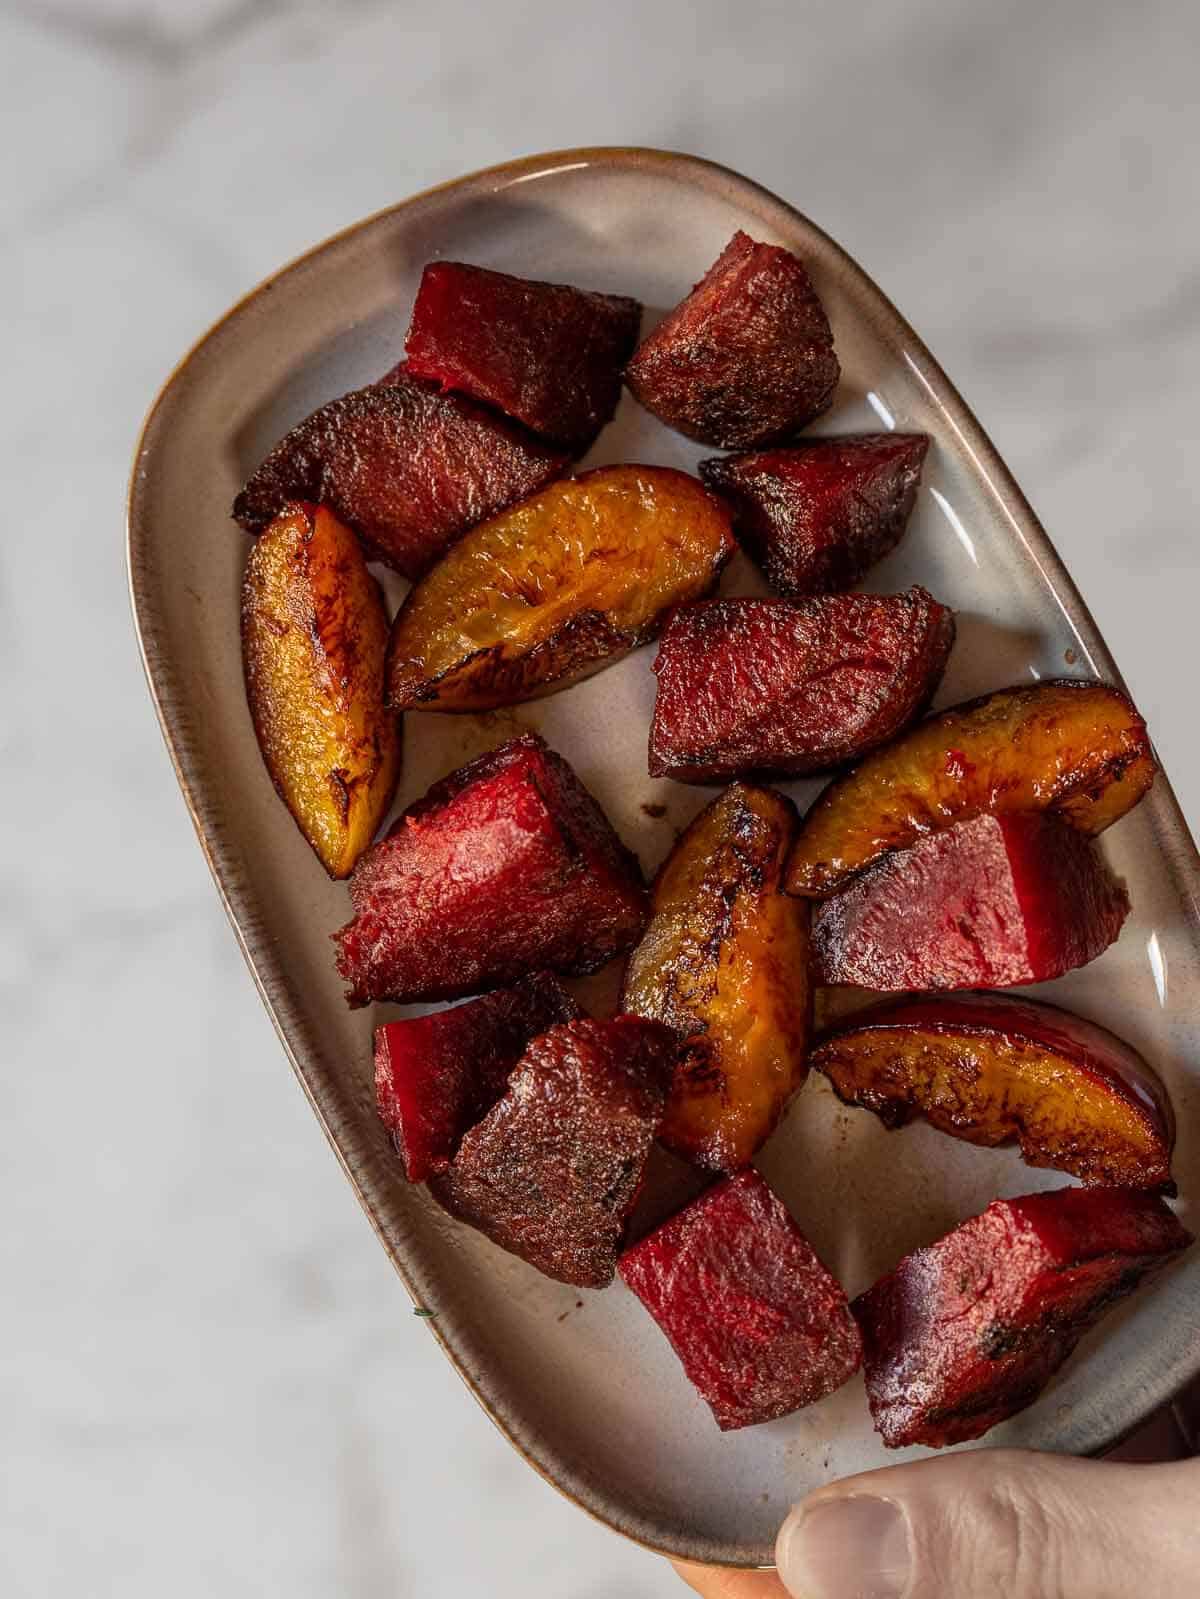 braised slices of beets and plums.